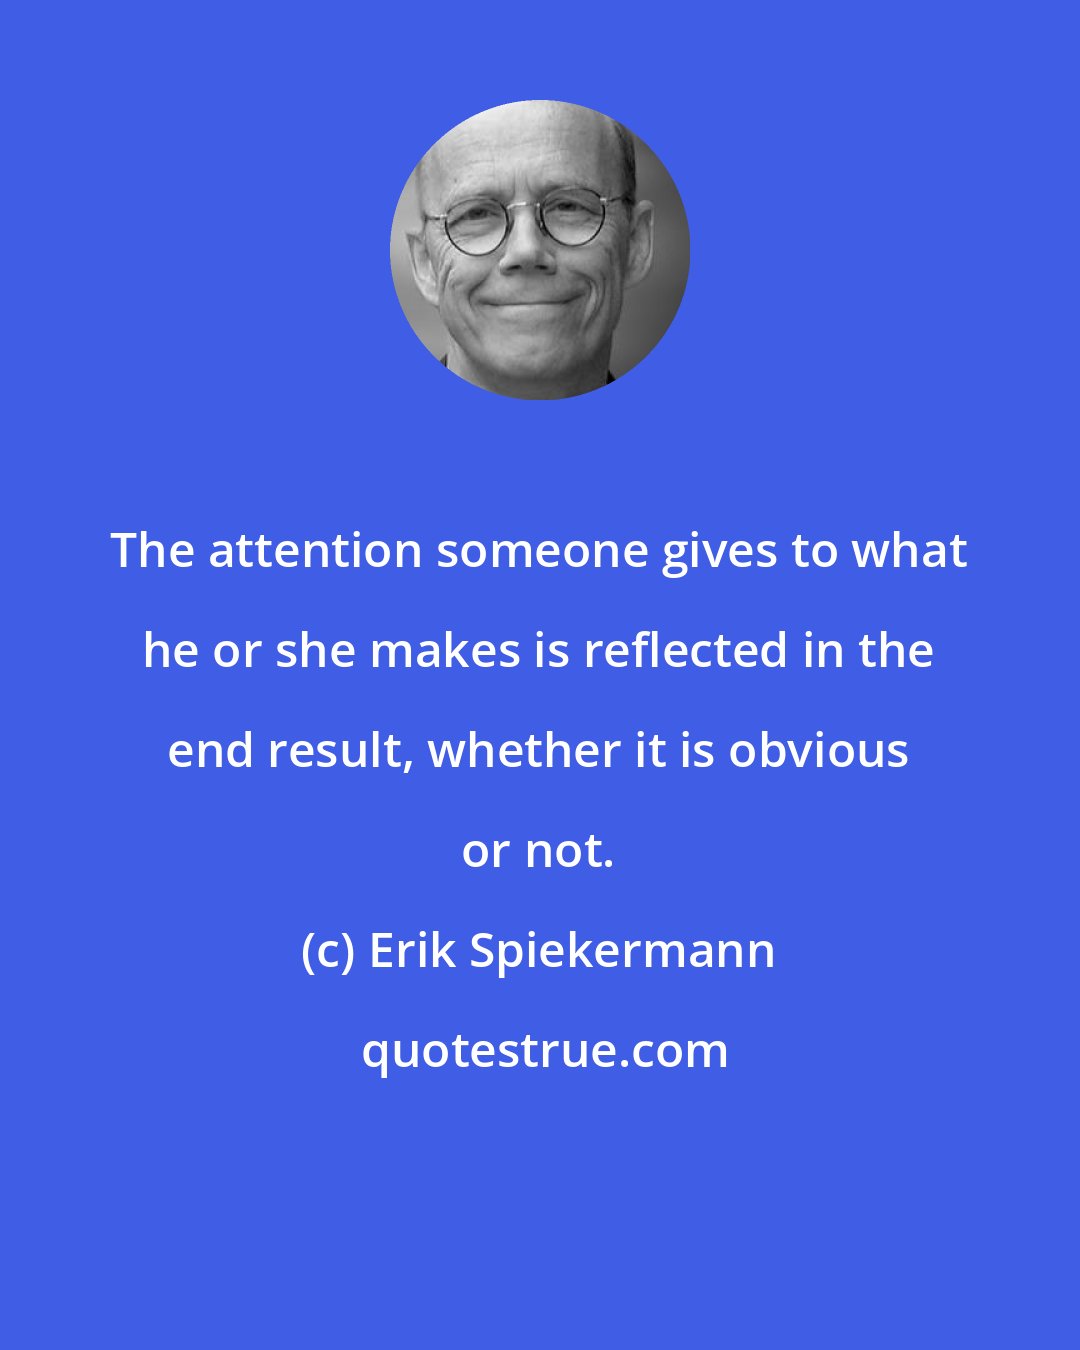 Erik Spiekermann: The attention someone gives to what he or she makes is reflected in the end result, whether it is obvious or not.